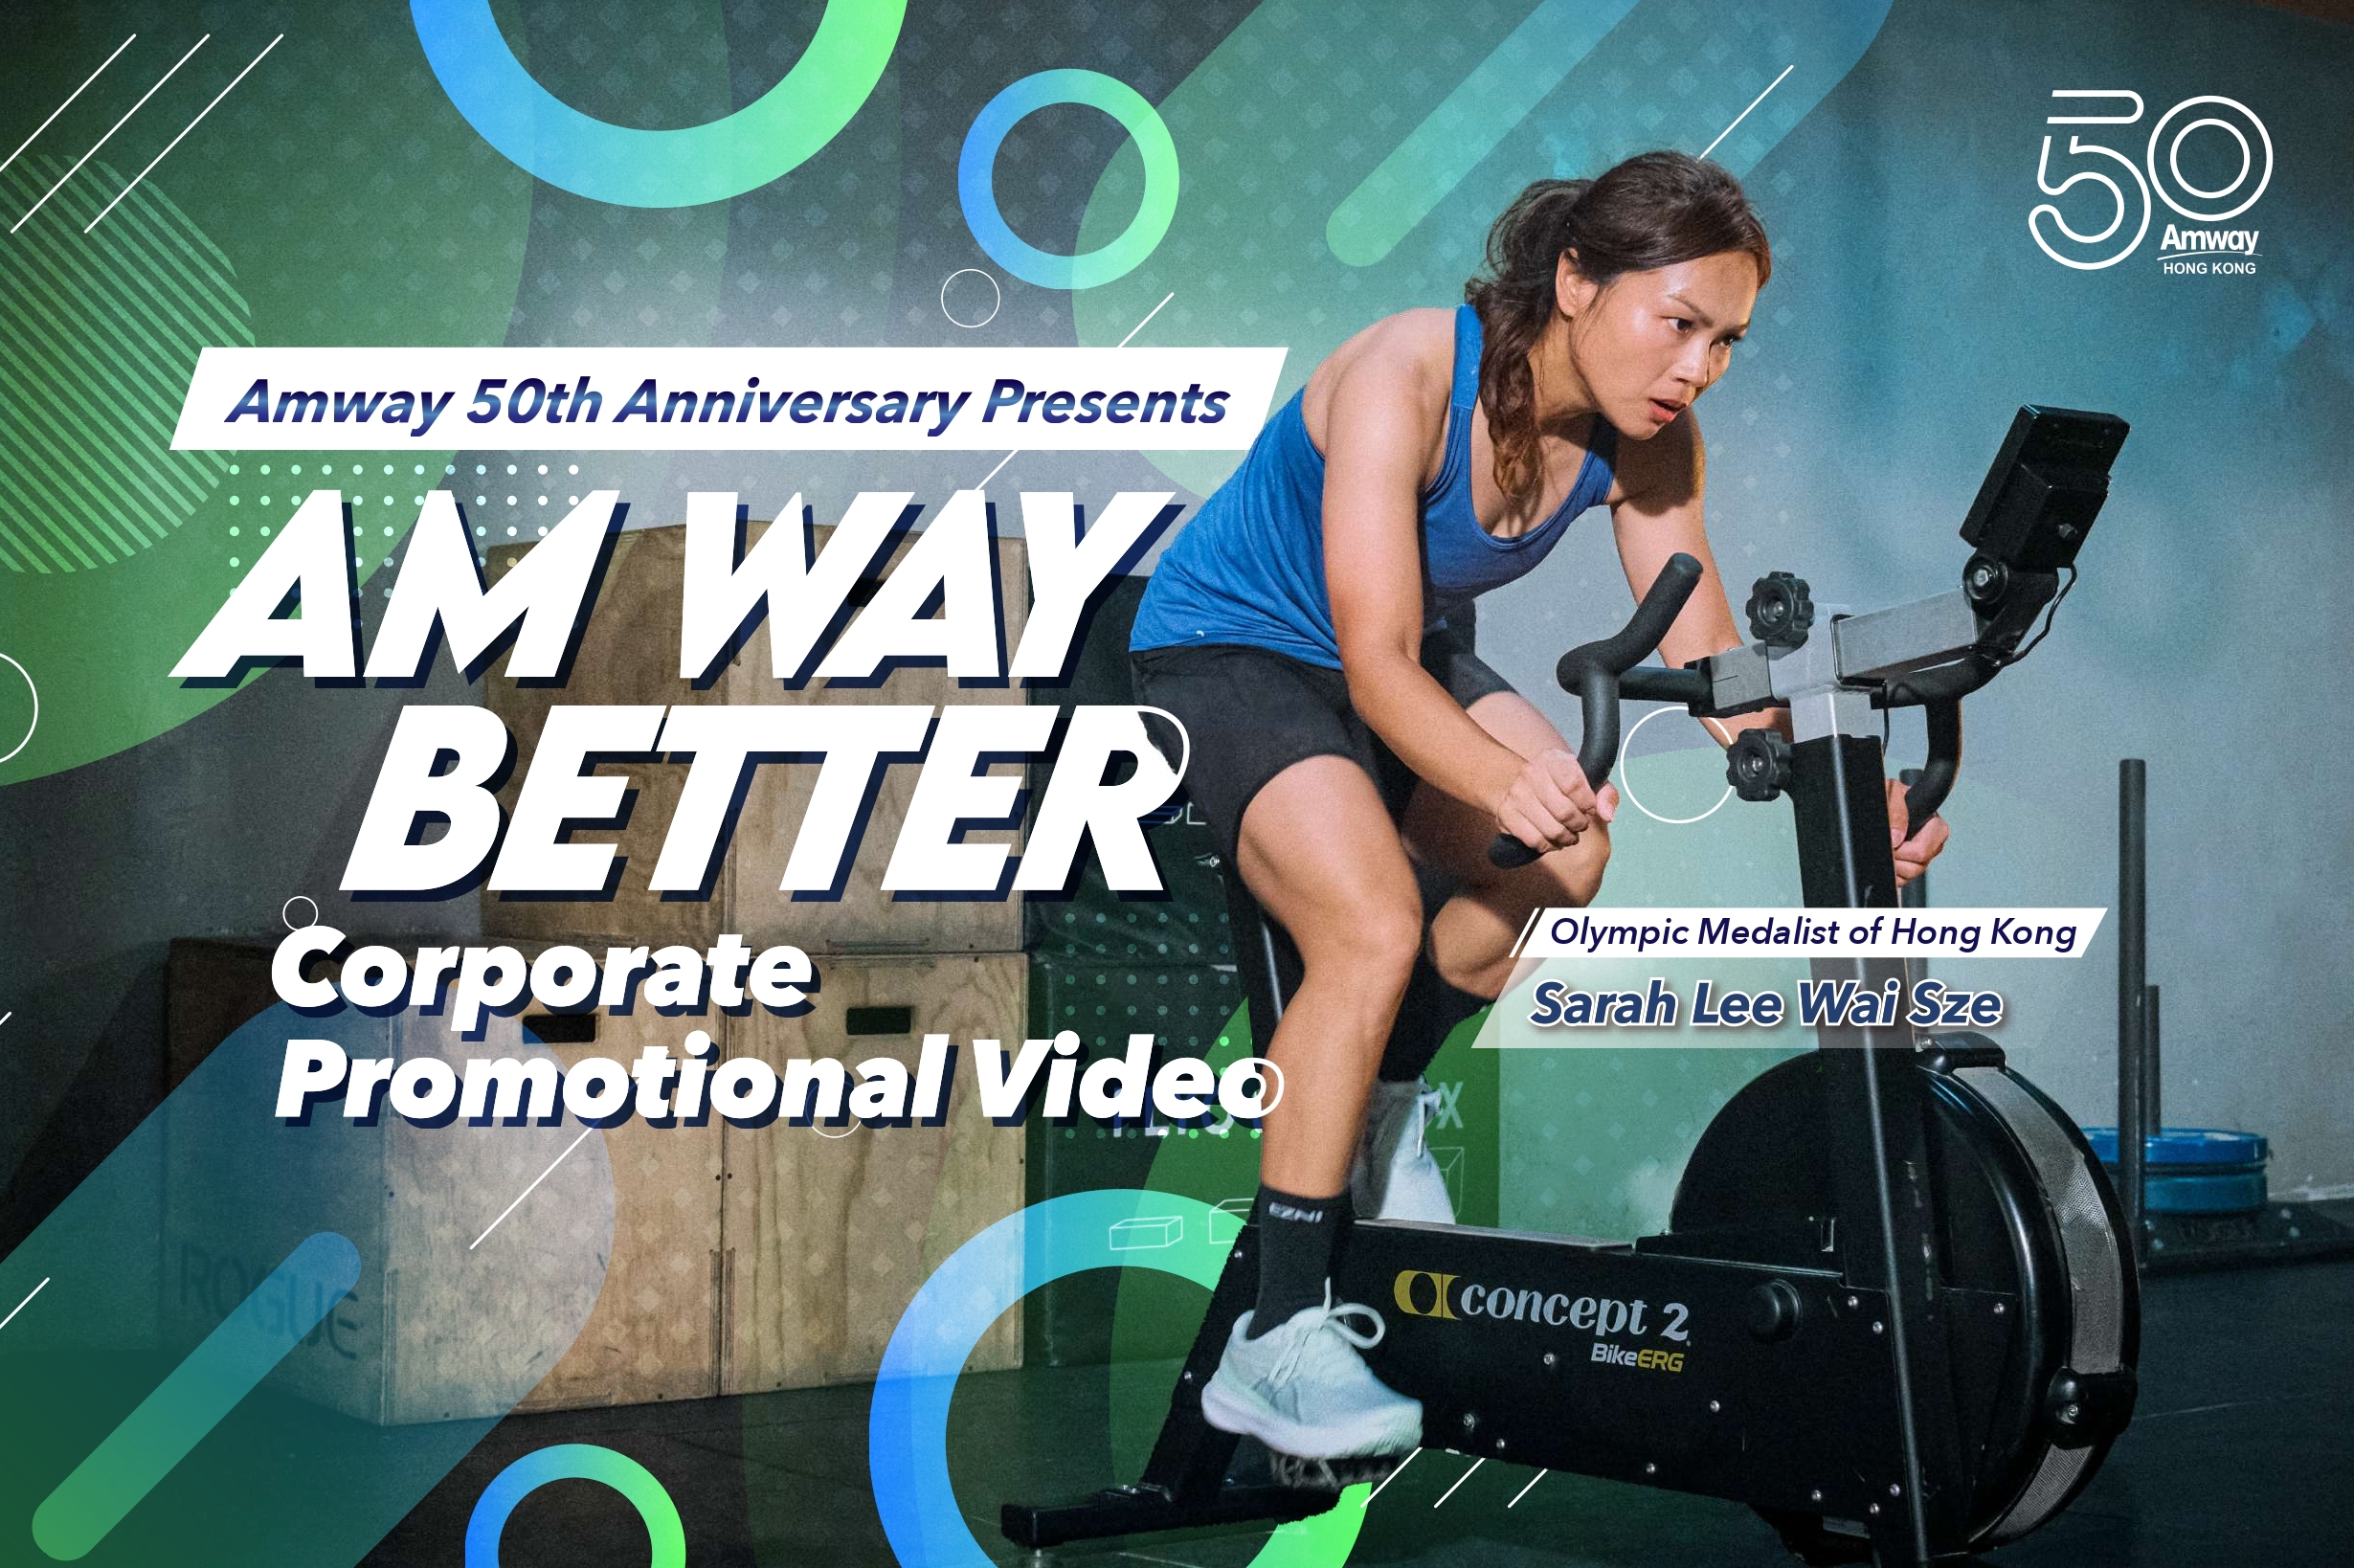 Amway 50th Anniversary Presents︱Am Way Better Corporate Promotional Video